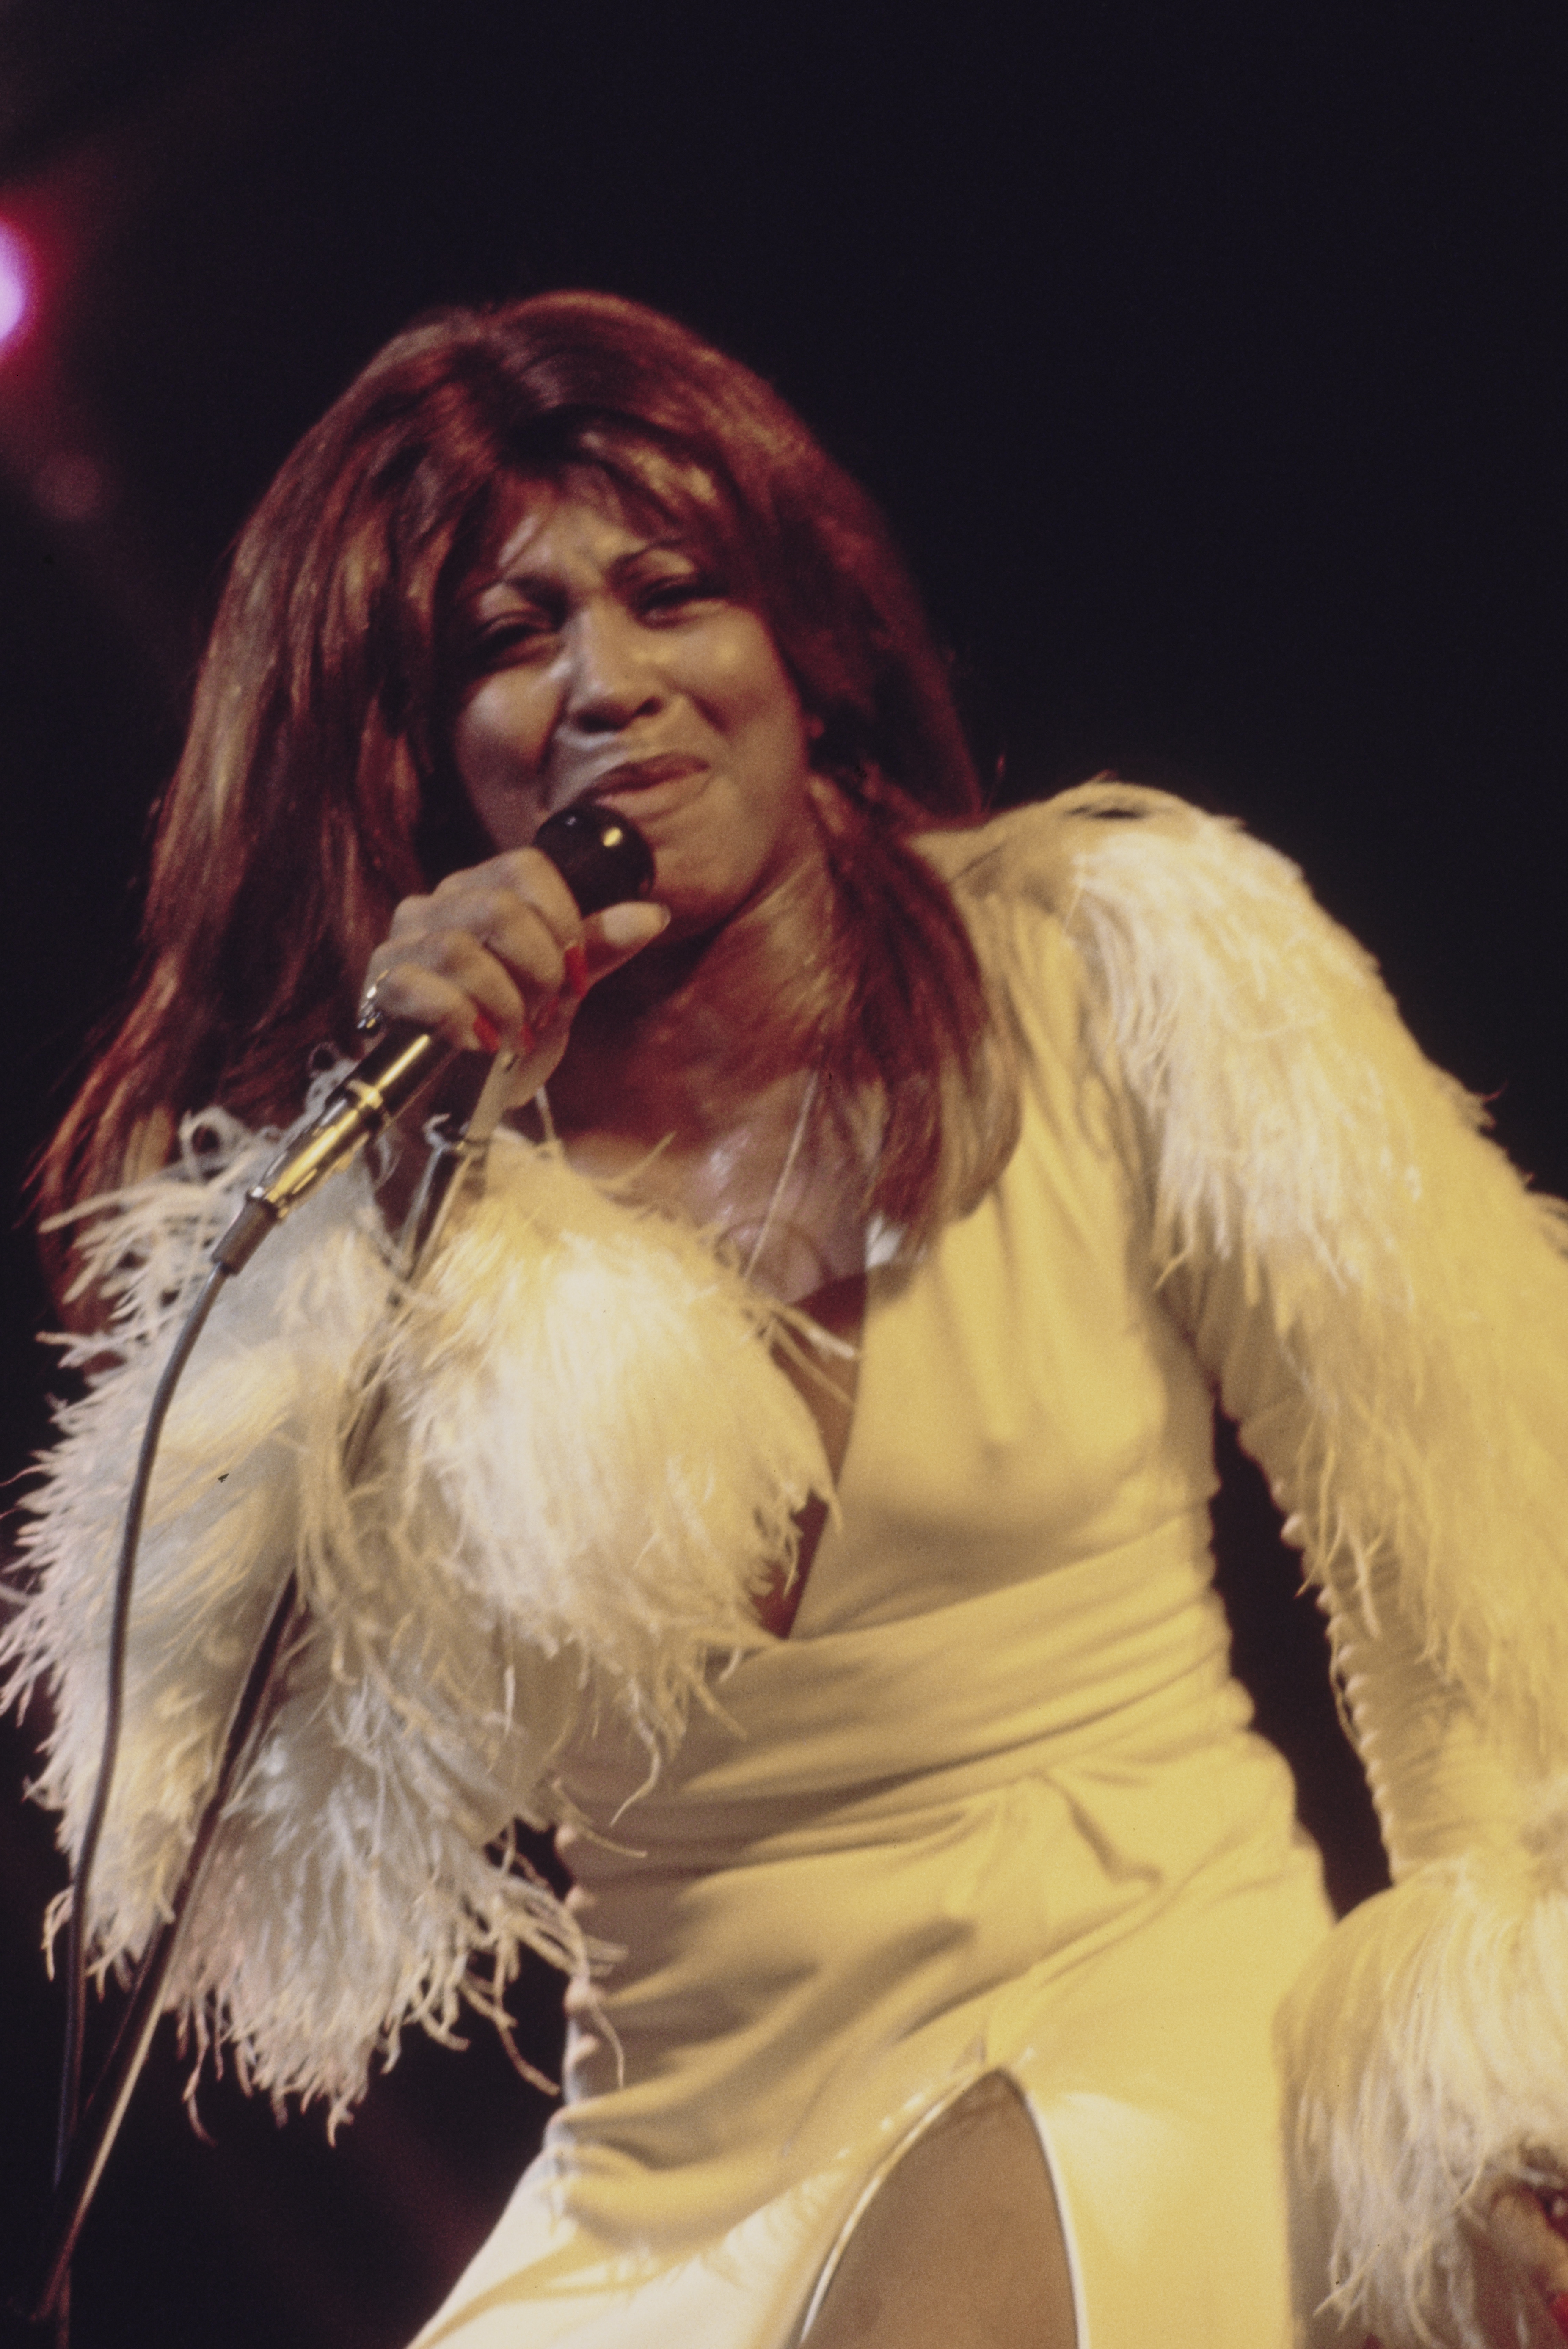 The singer performing on stage in the 1970s. | Source: Getty Images